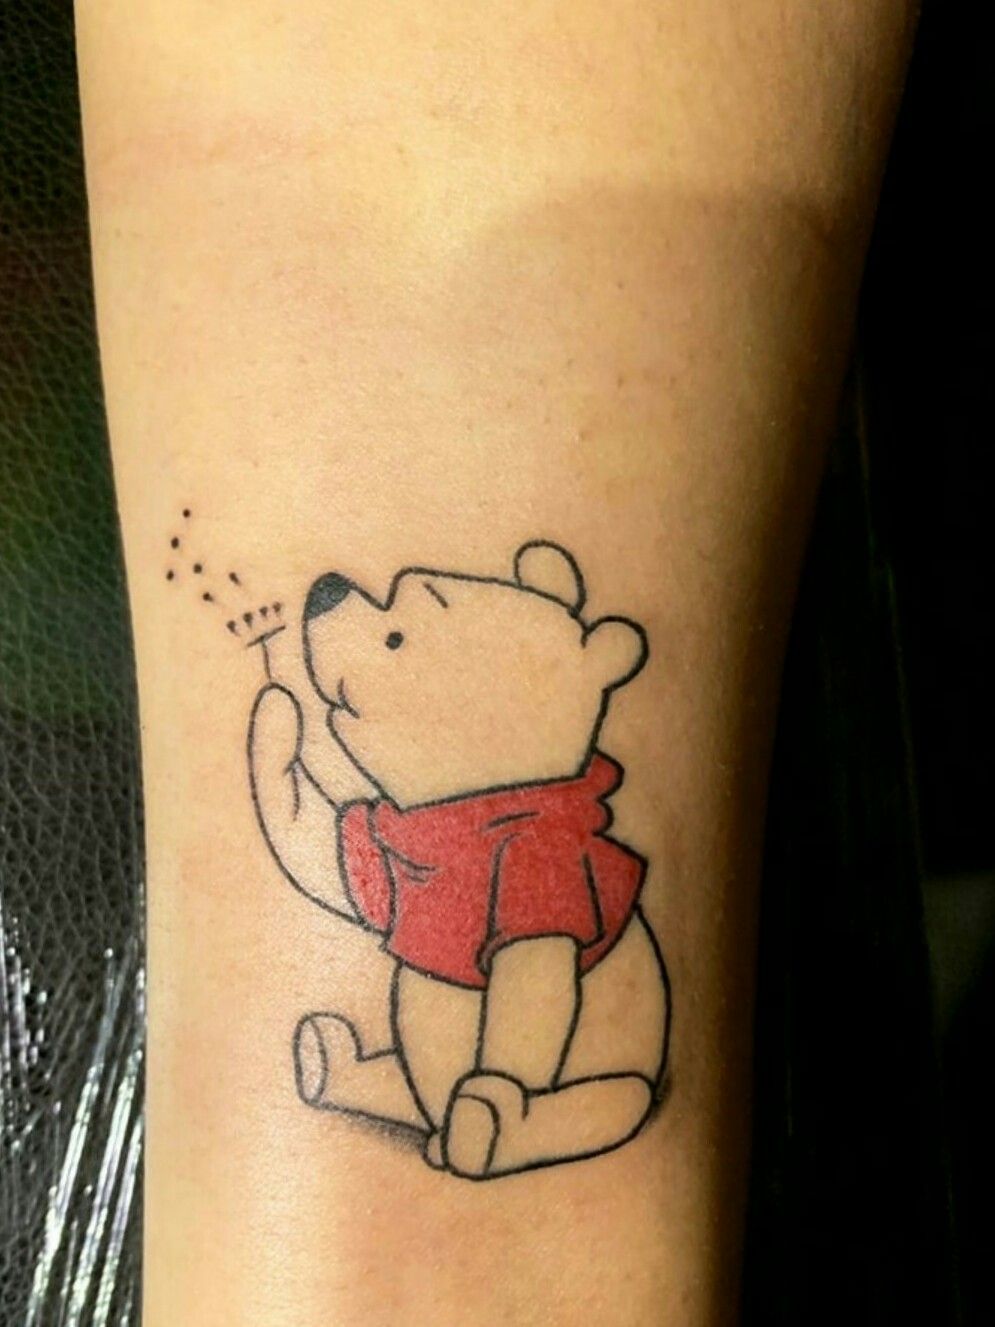 Tattoo uploaded by Karan Kashyap • Pooh Bear Do this couple tattoos  childhood cartoon characters love to do this... To book appointment call  now 7973316932 • Tattoodo